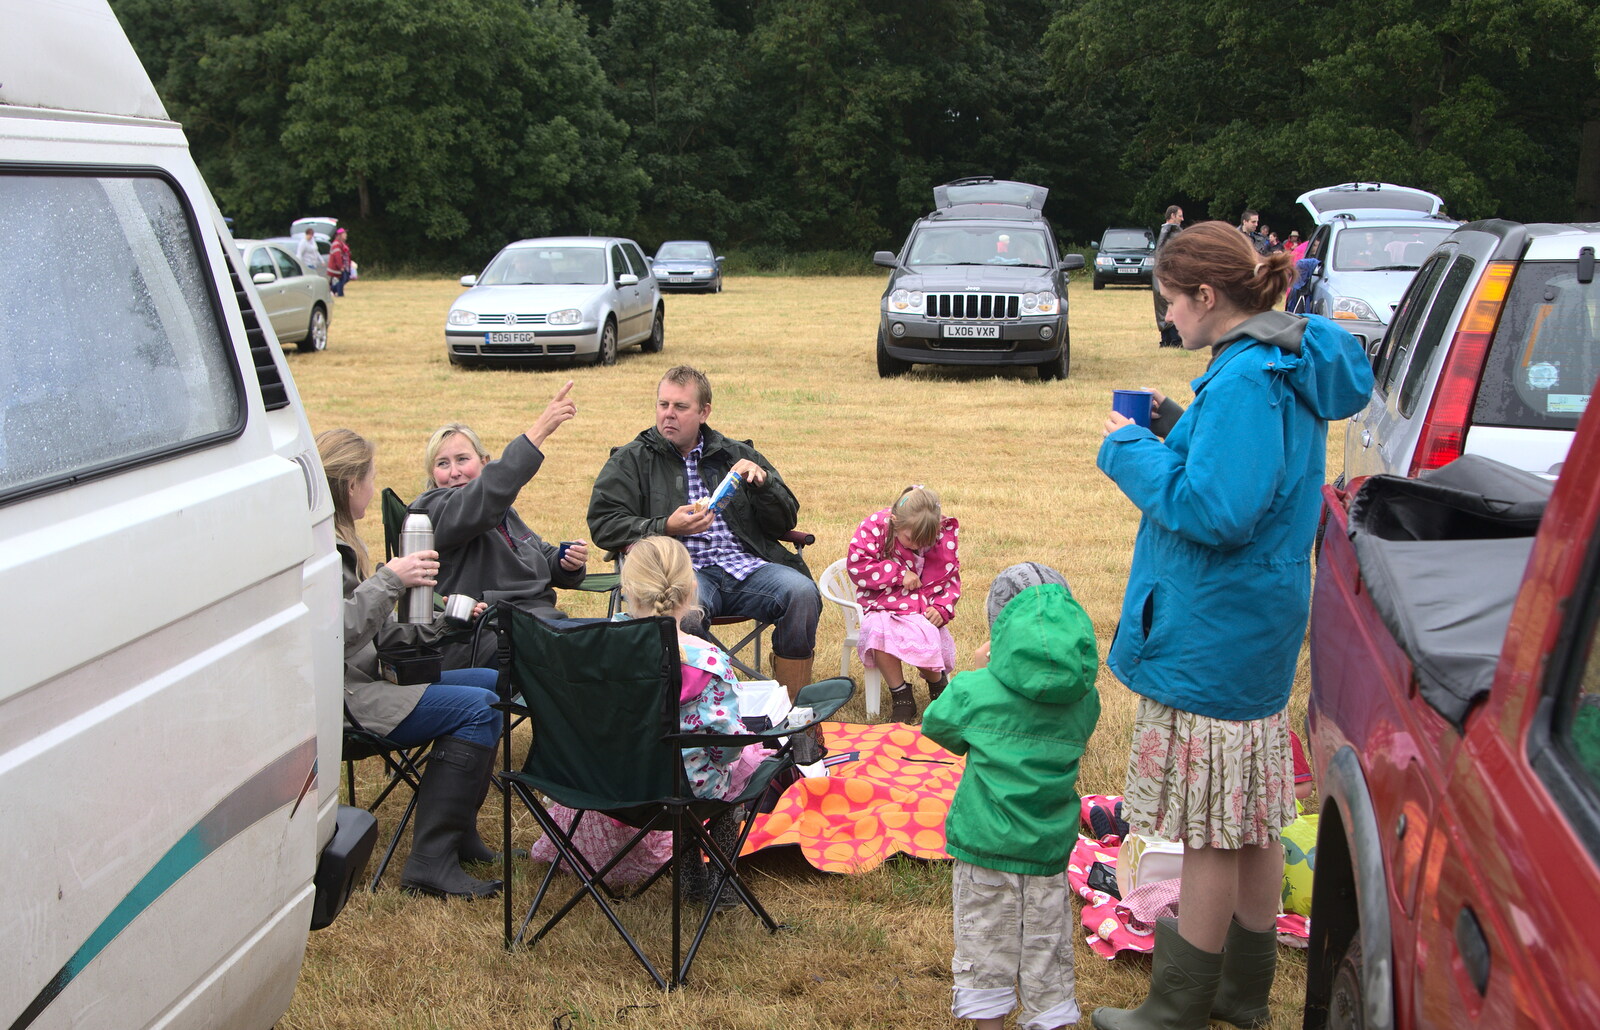 Picnic time from The Pink Ladies Tractor Run, Harleston and Gawdy Park, Norfolk - 5th July 2015